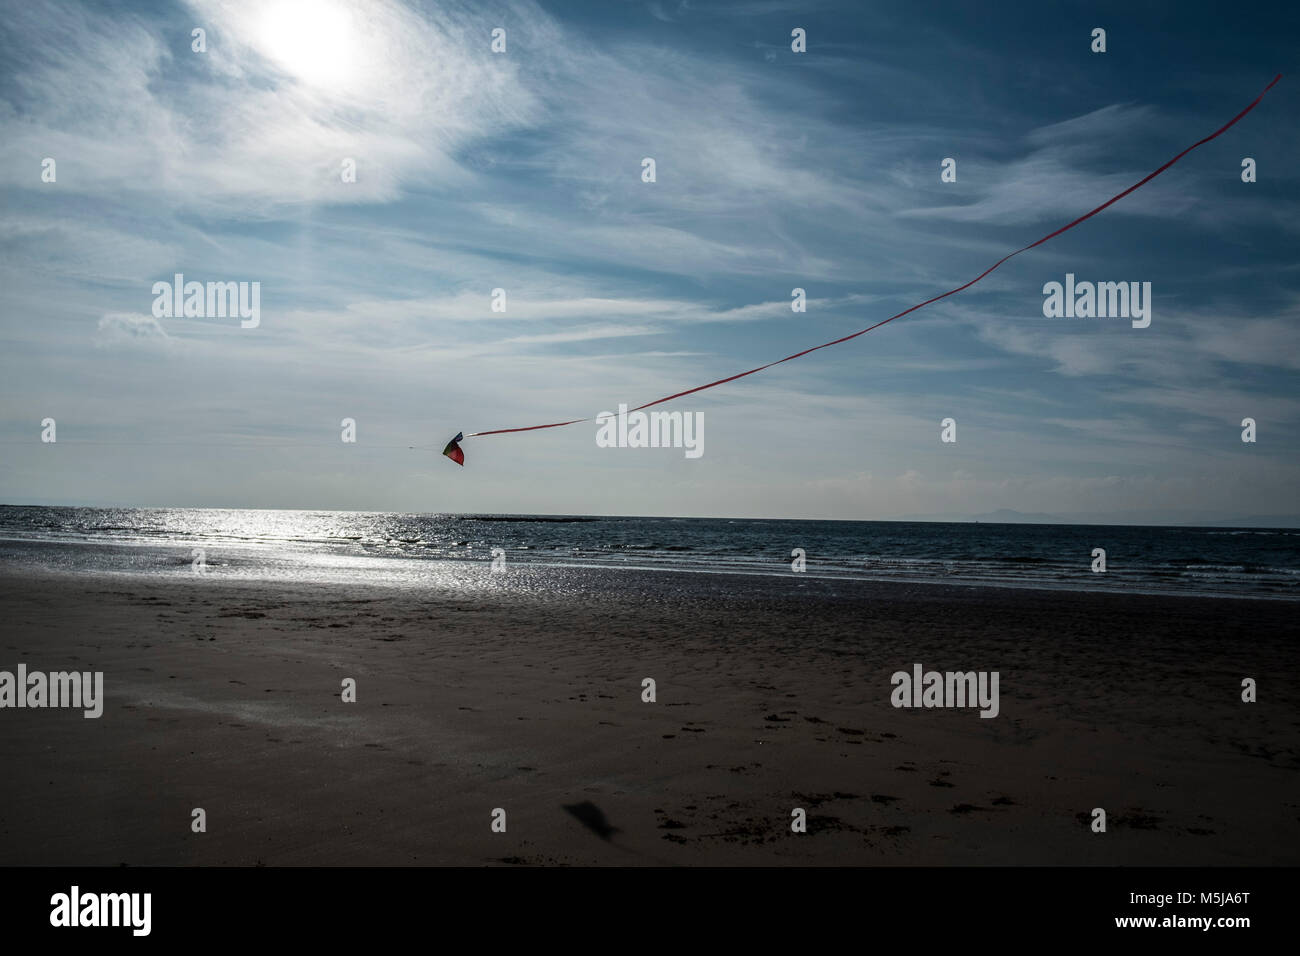 A kite flying over the beach at Seamill in Ayrshire, Scotlands, UK. Stock Photo